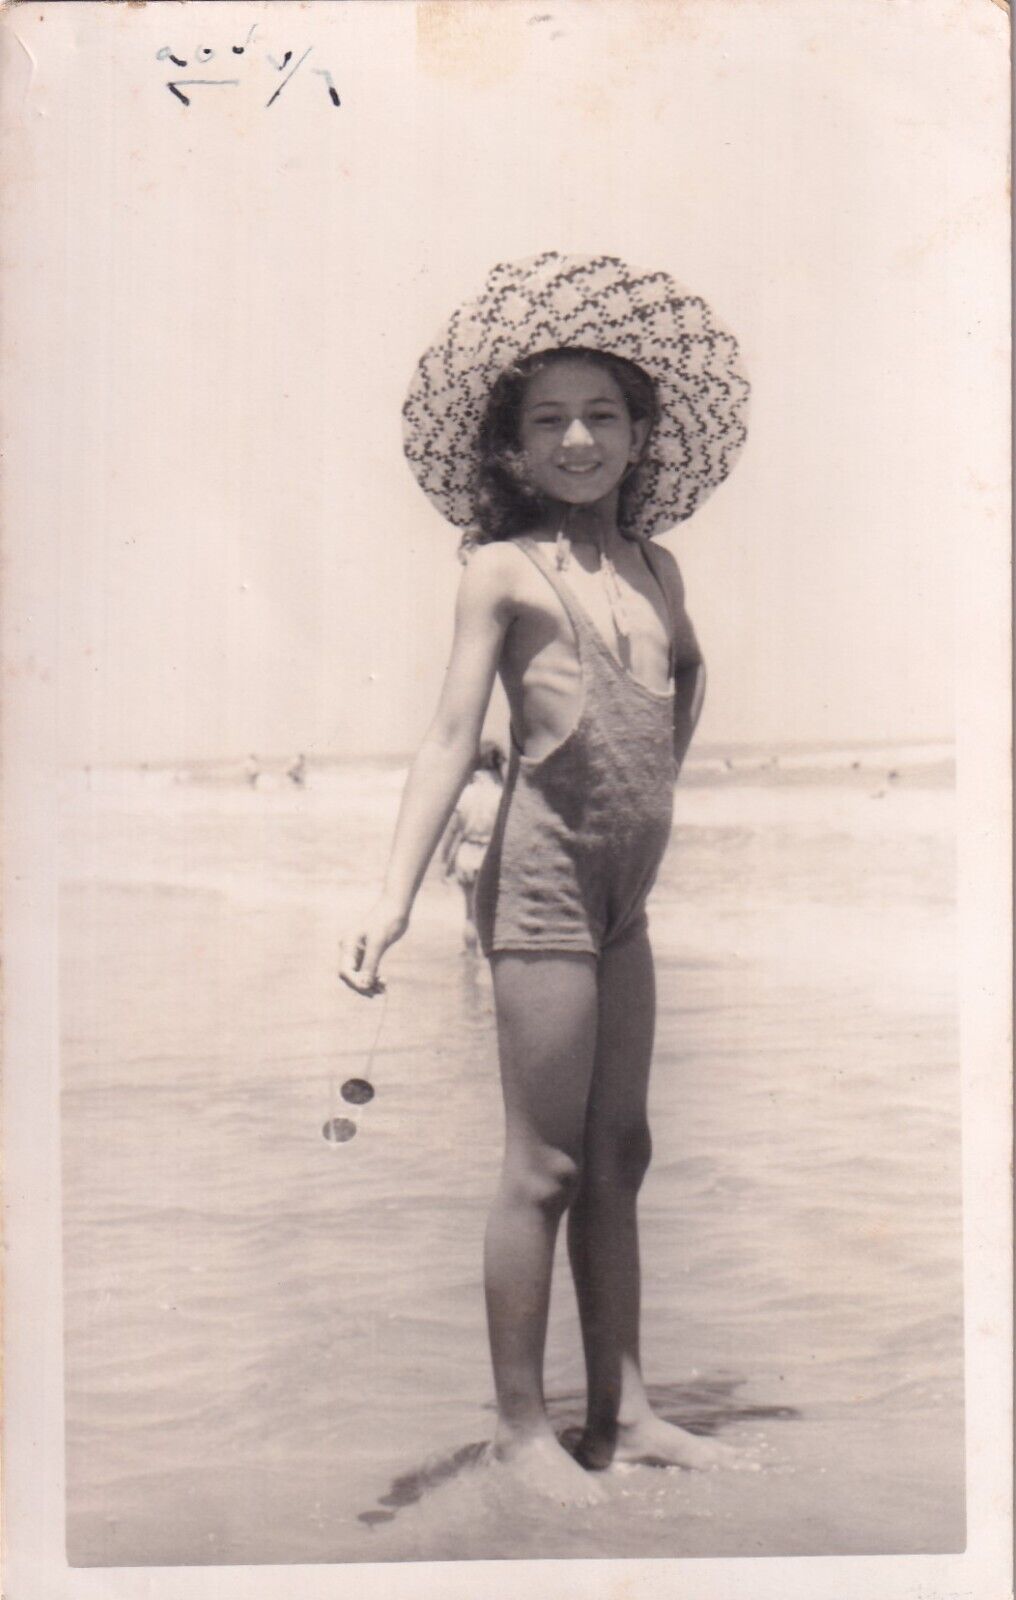 EGYPT VINTAGE PHOTO - Cute GIRL WITH BIG HAT  ON THE BEACH .1950